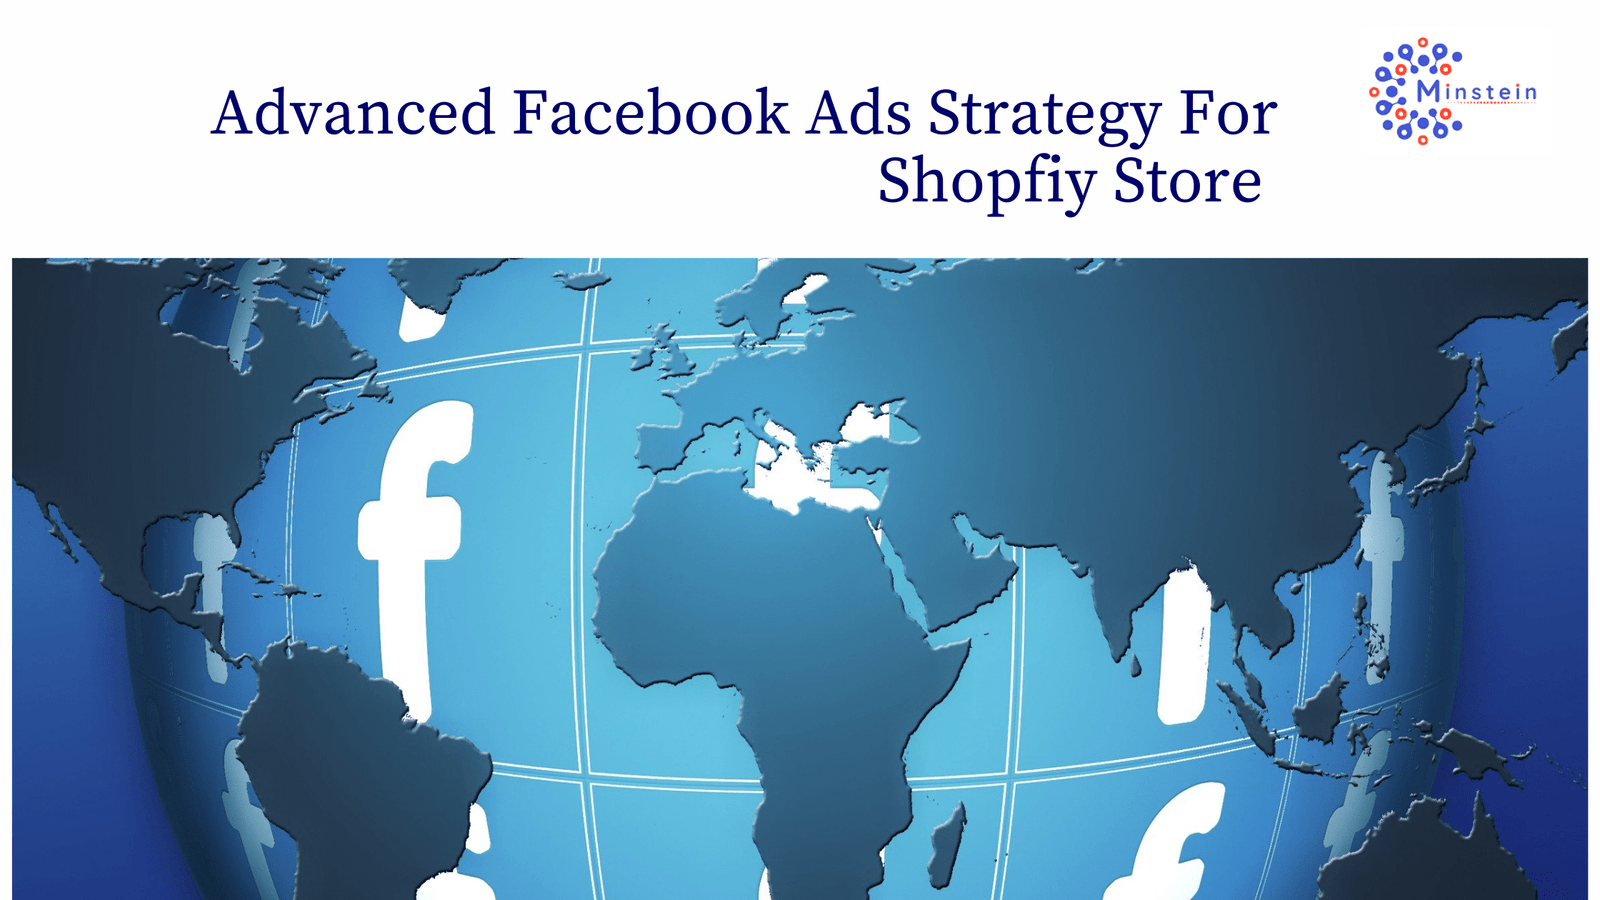 Advanced Facebook Ads Strategy For Shopfiy Store